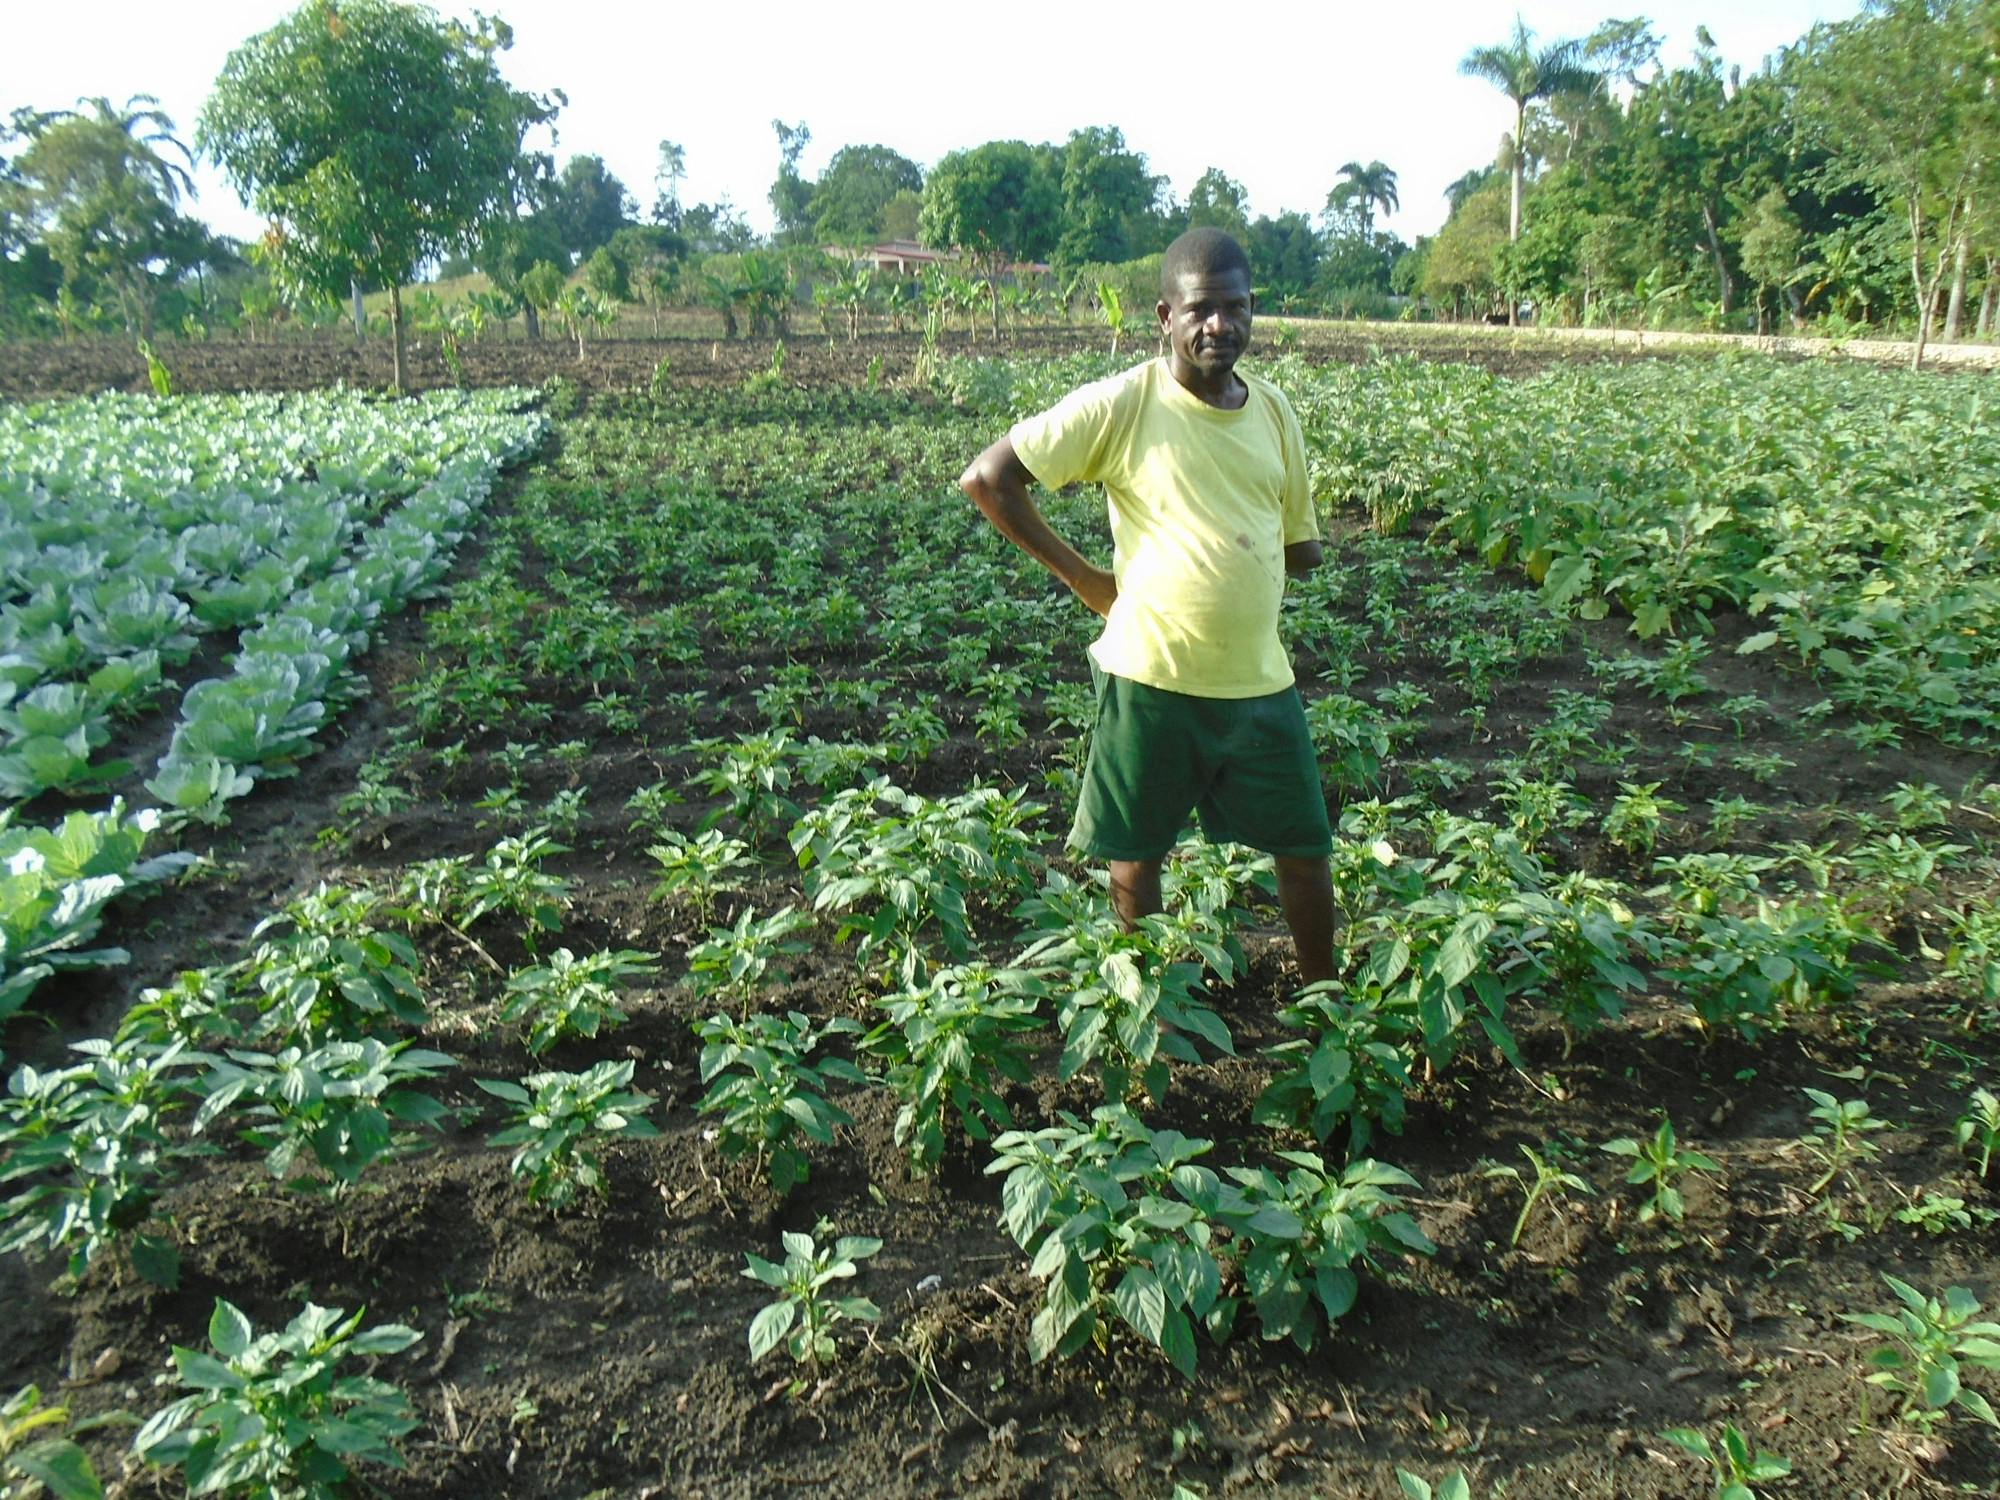 Odins Robert was able to receive agricultural training and vegetable seeds from FH. Now, he is able to provide for all of his family's needs despite his physical disability.